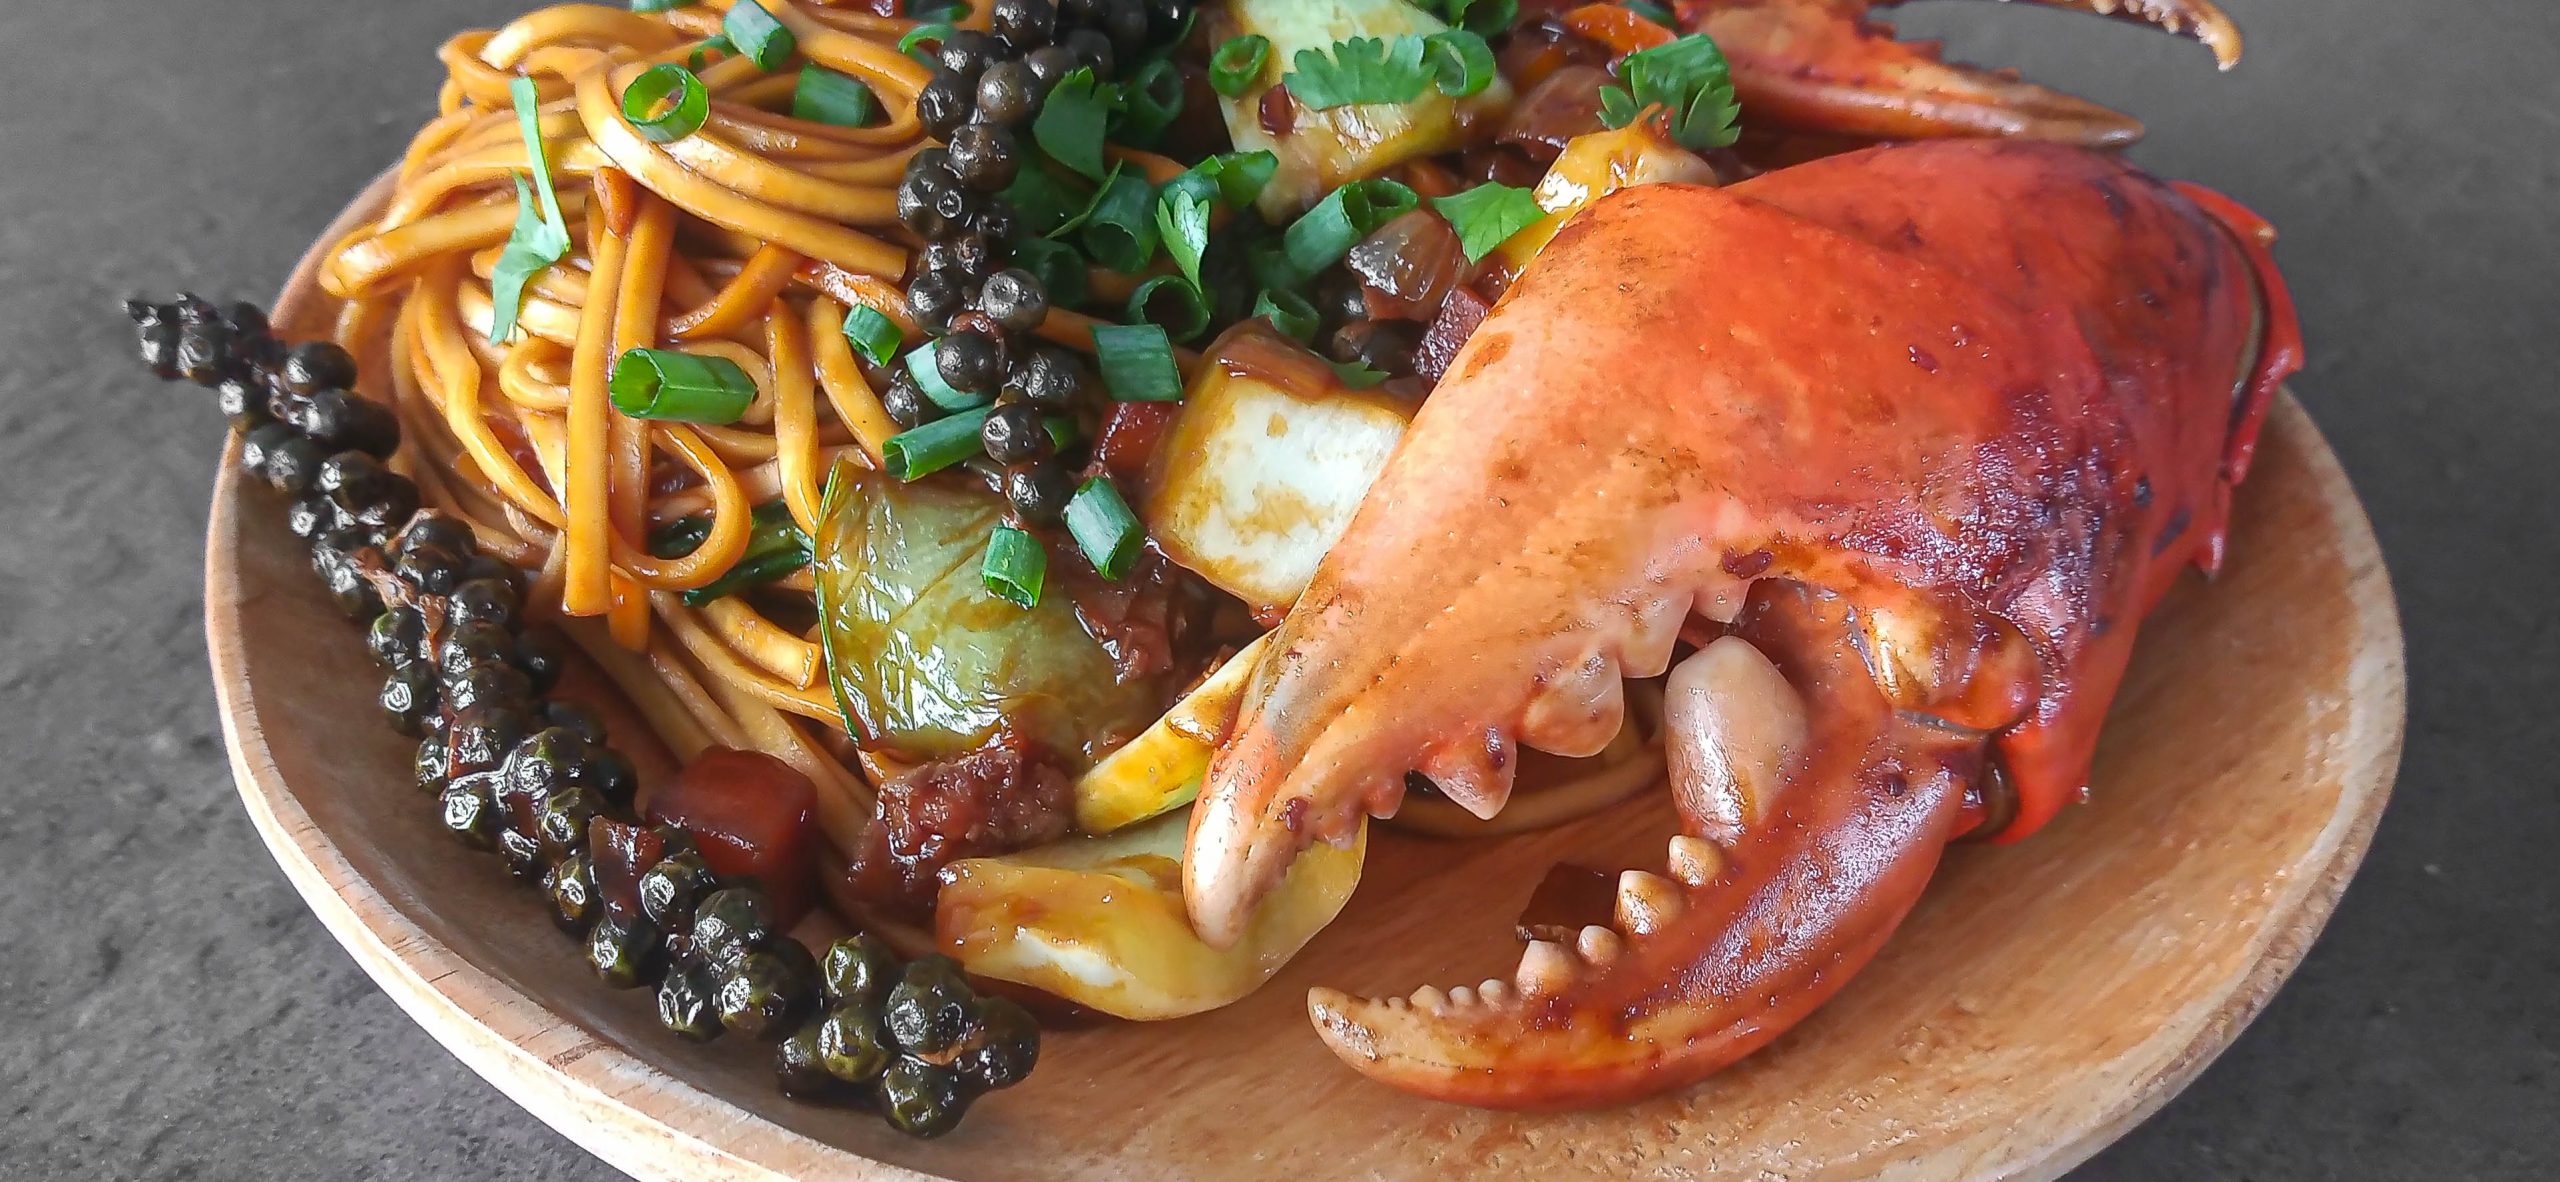 Stir-fried noodles with vegetables and mangrove crab